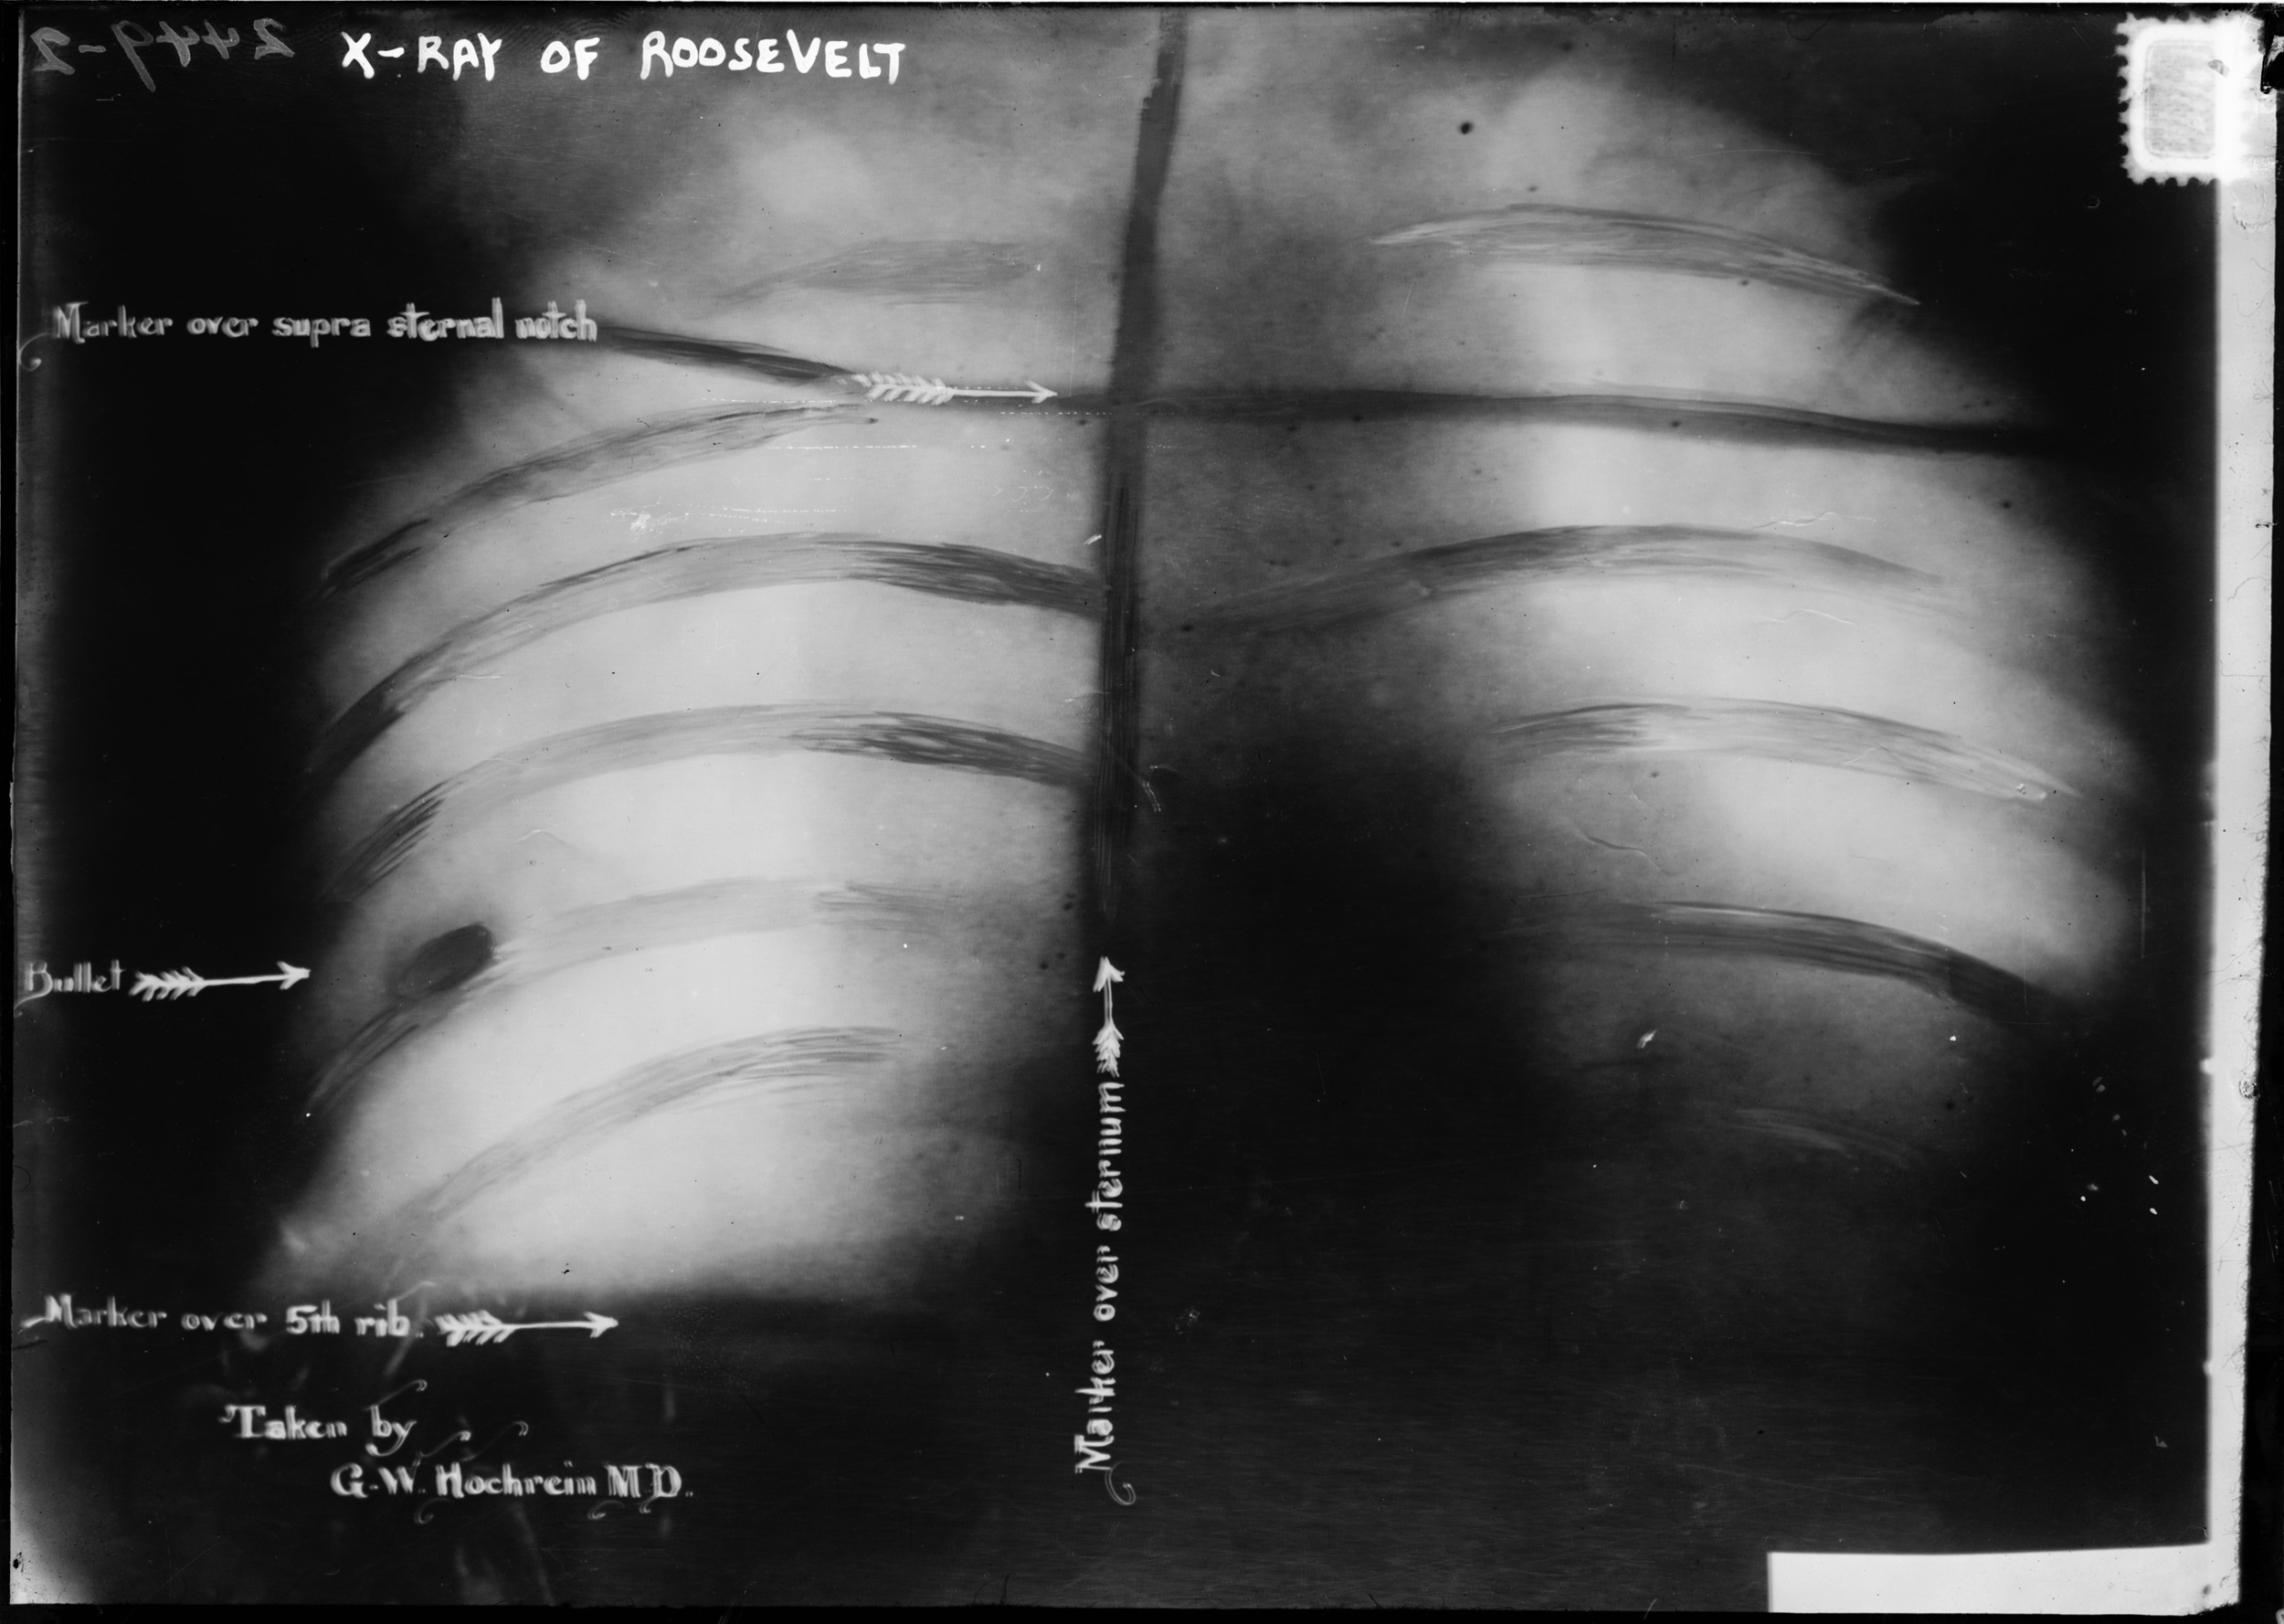 X-ray of Roosevelt's ribs with embedded bullet